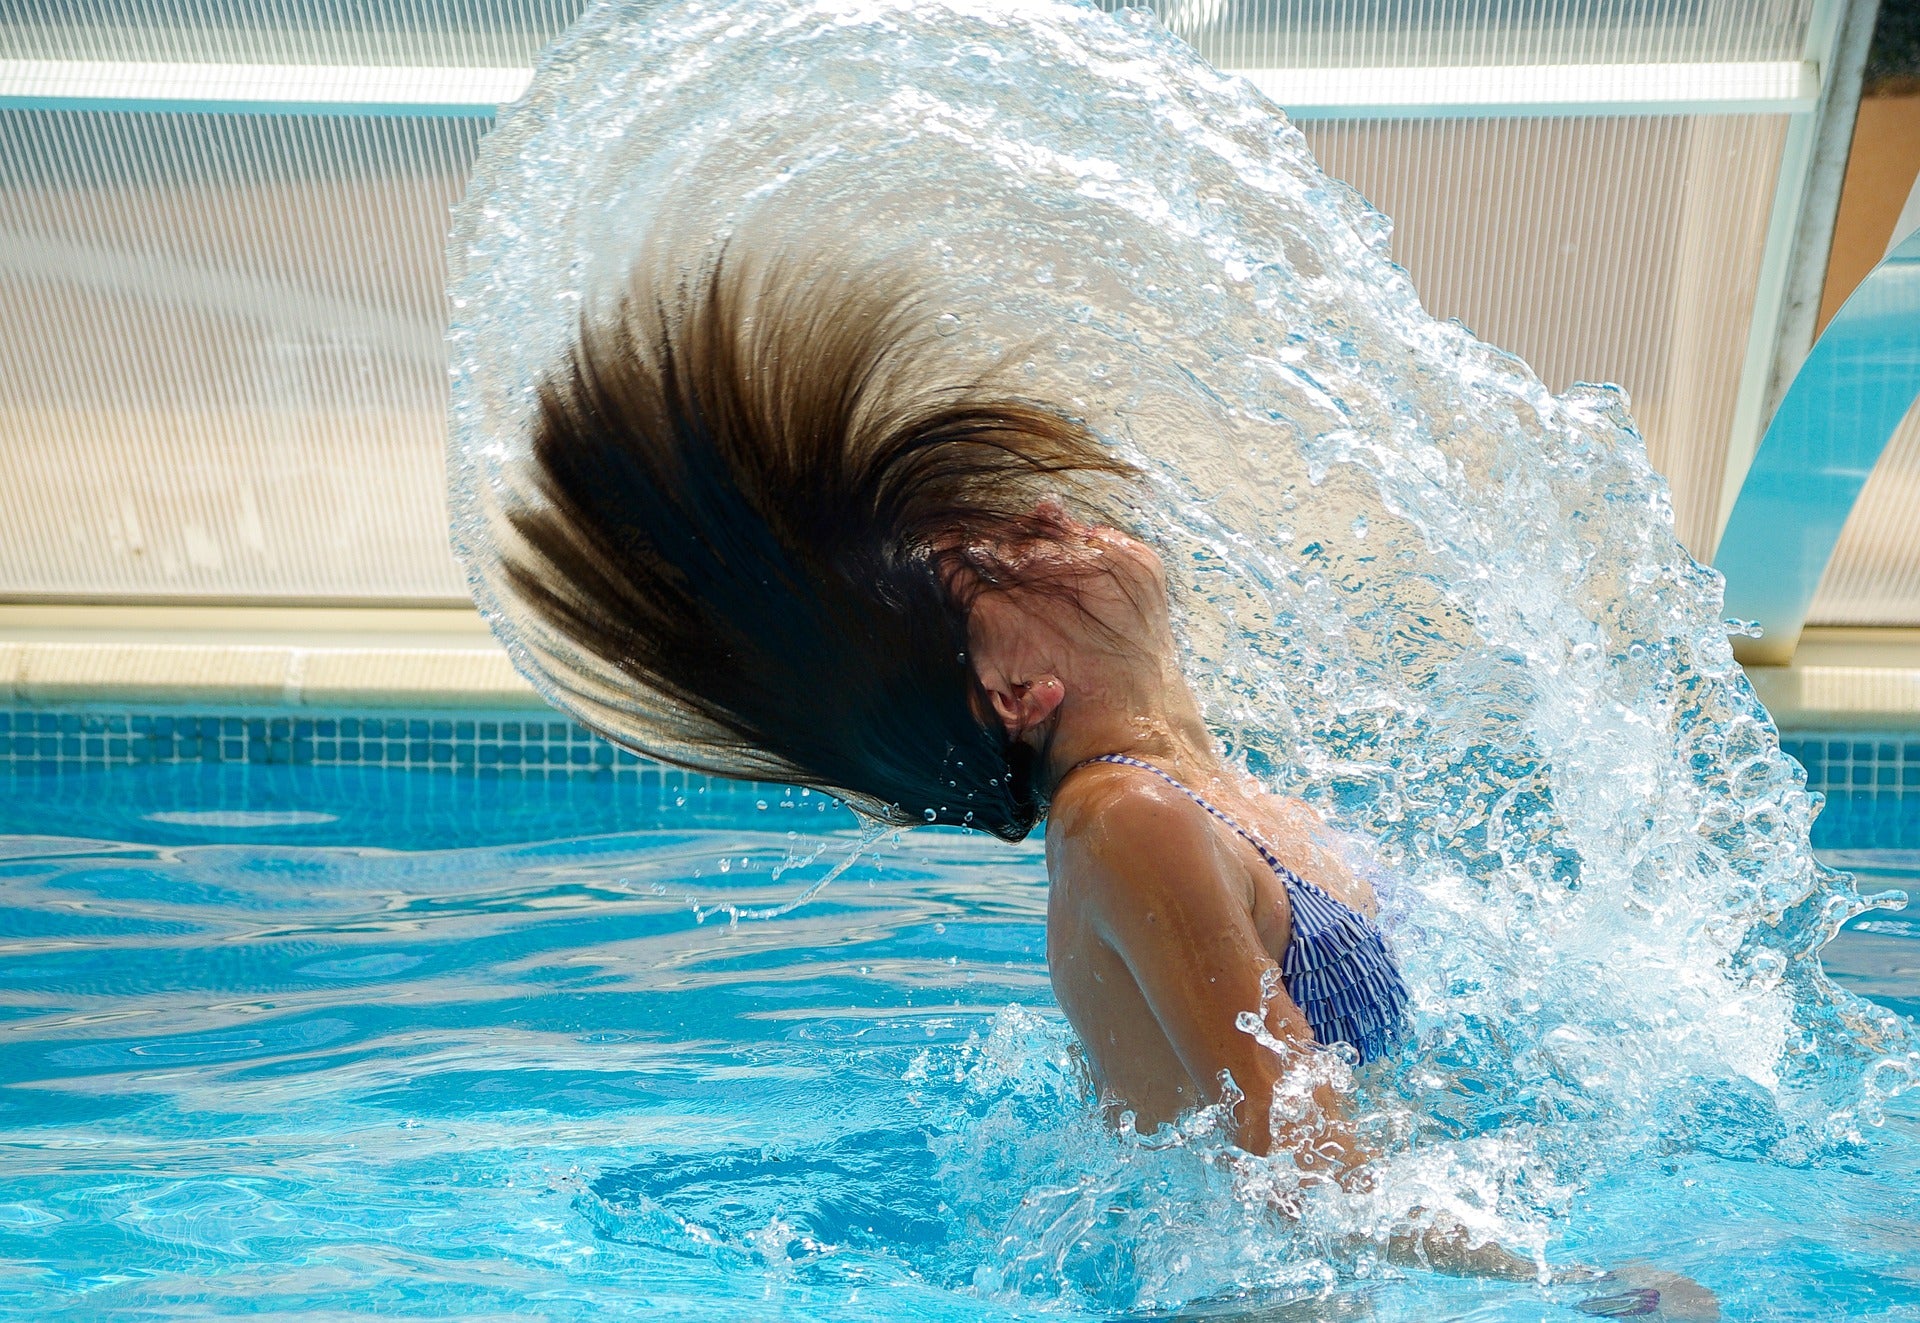 Does swimming pool water really turn blonde hair green?